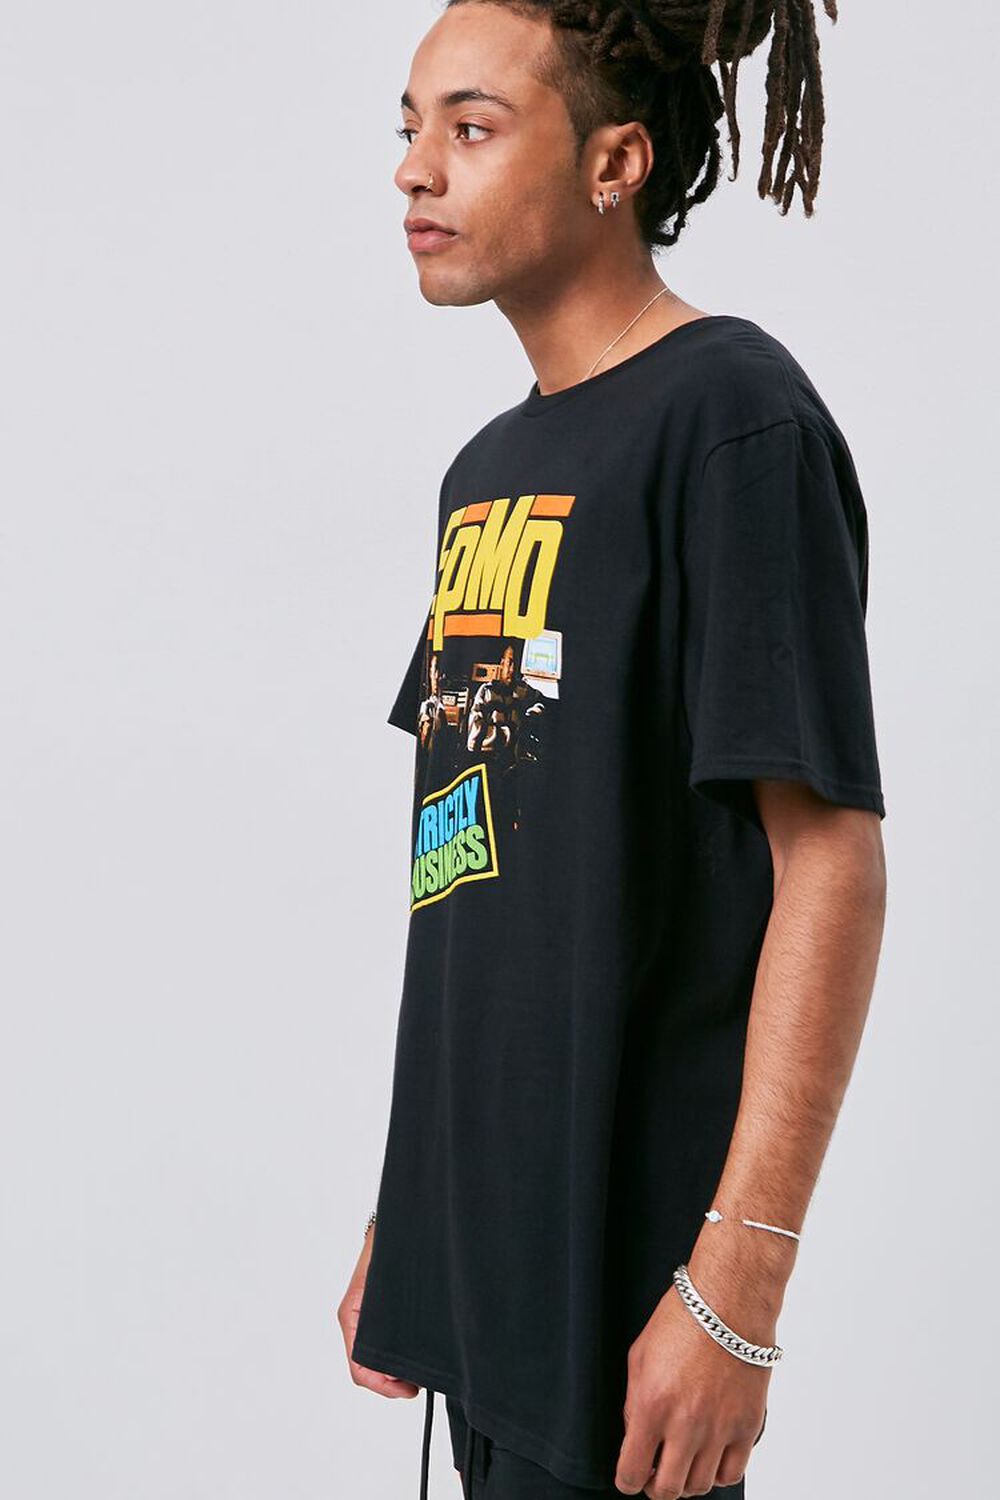 EPMD Strictly Business Graphic Tee